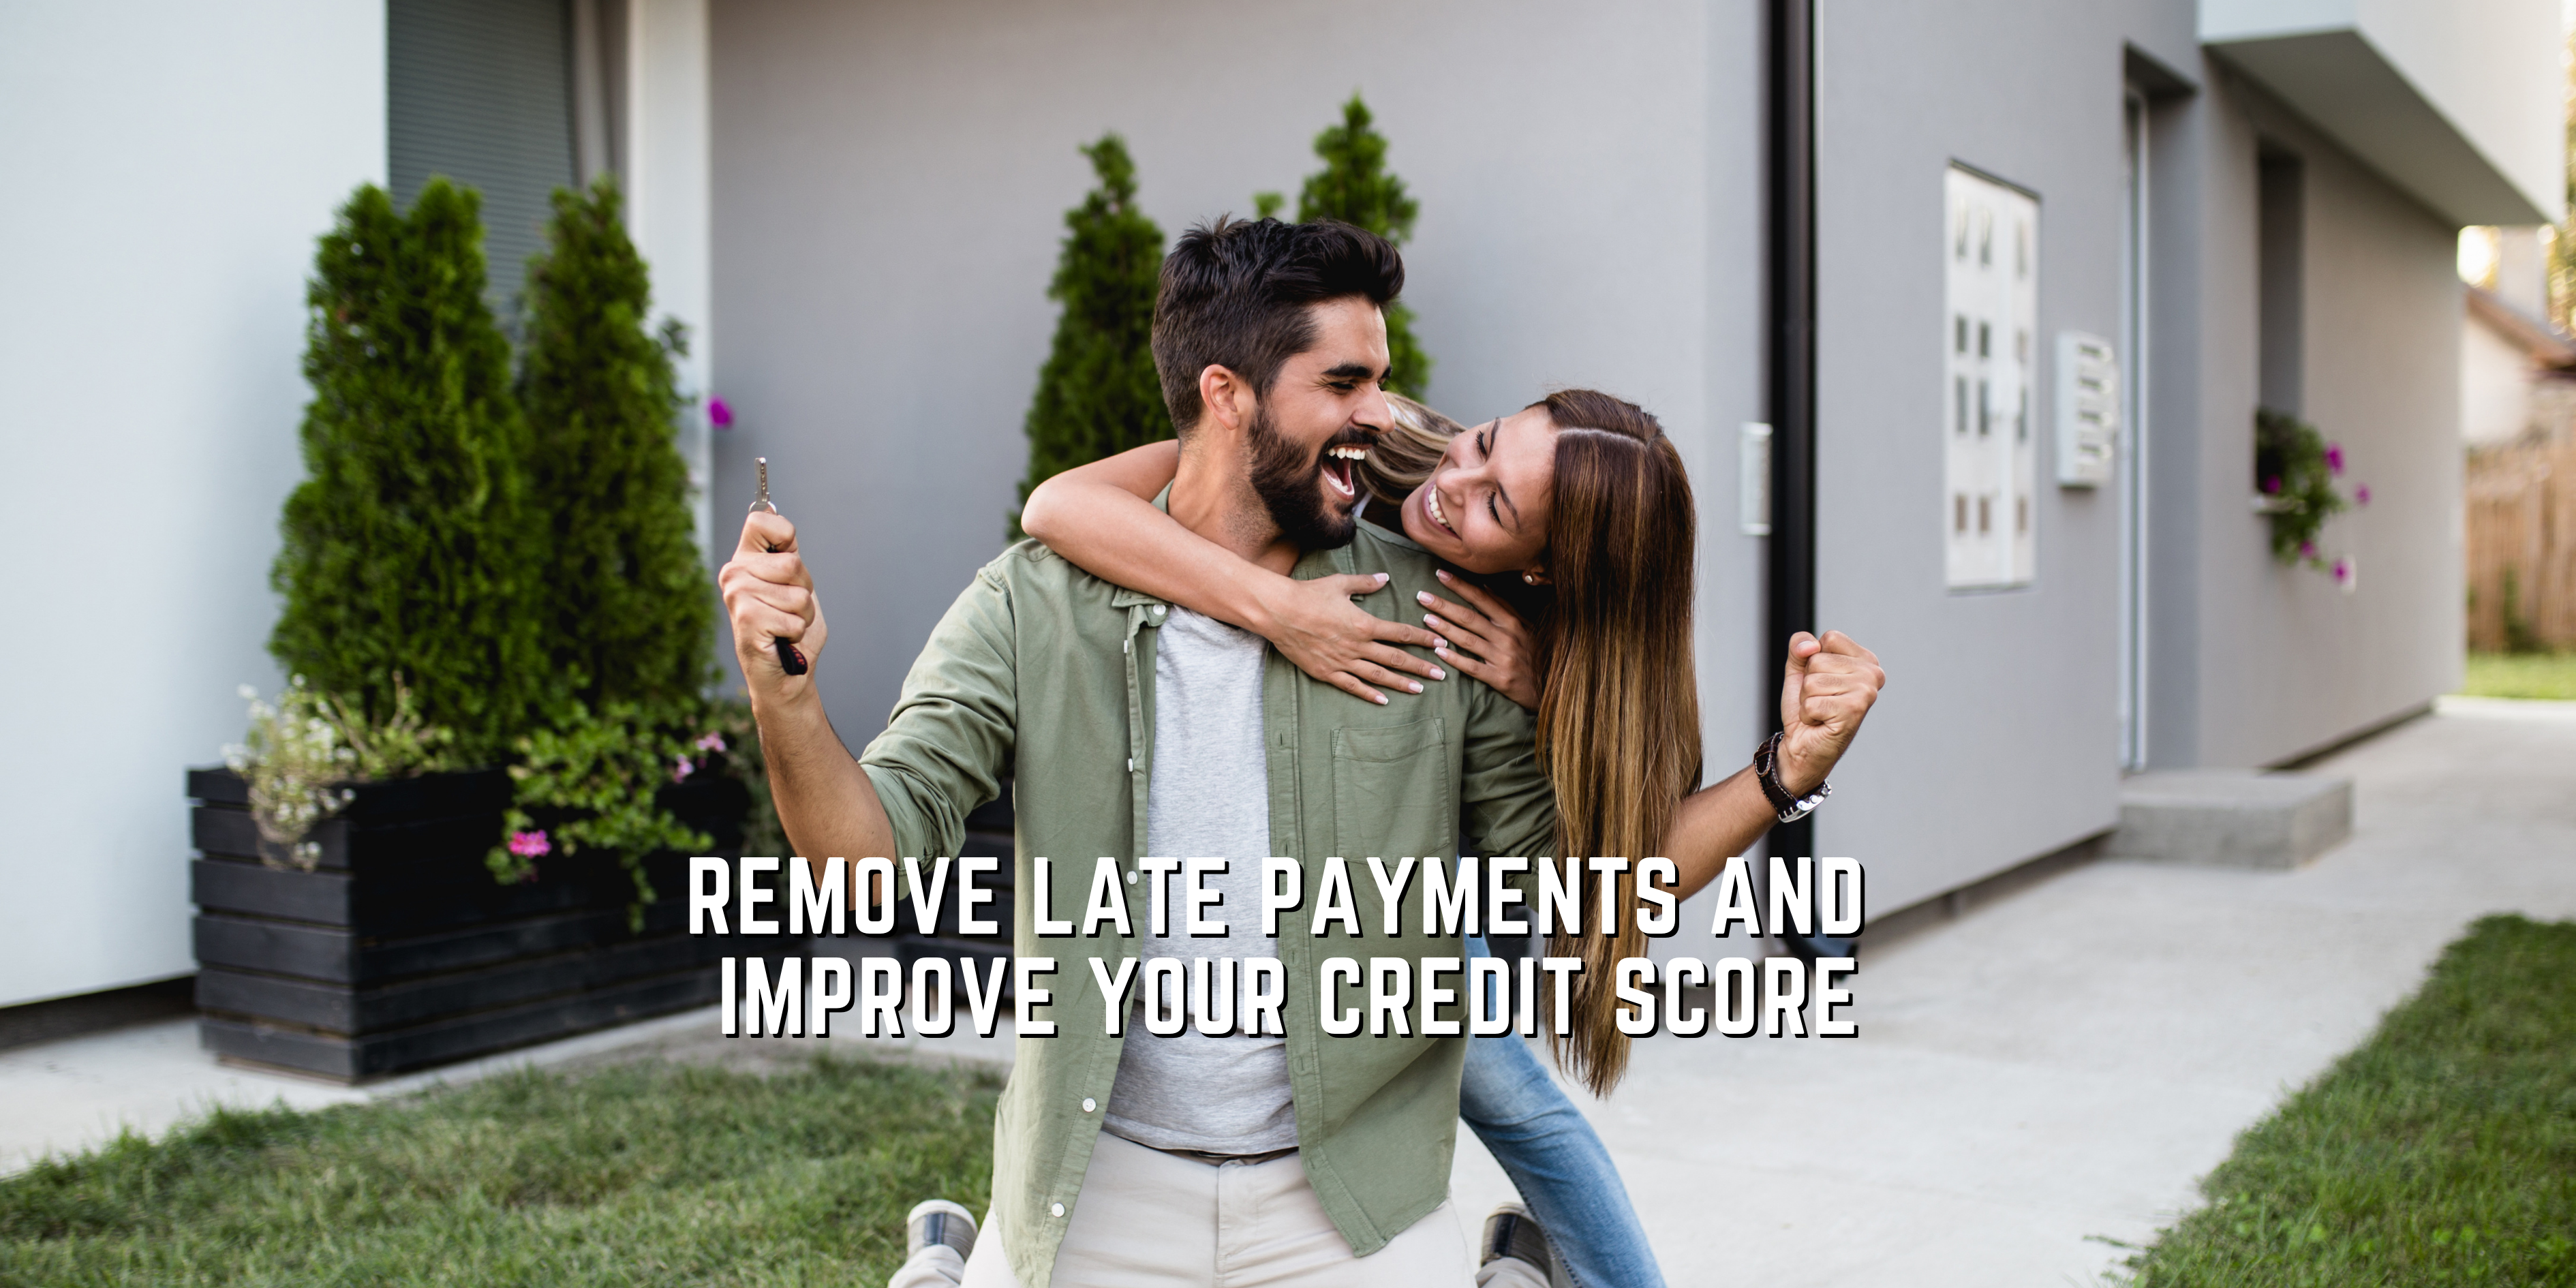 can credit repair companies remove late payments | https://mycralawyers.com.au | Phone 1300 667 218 Now